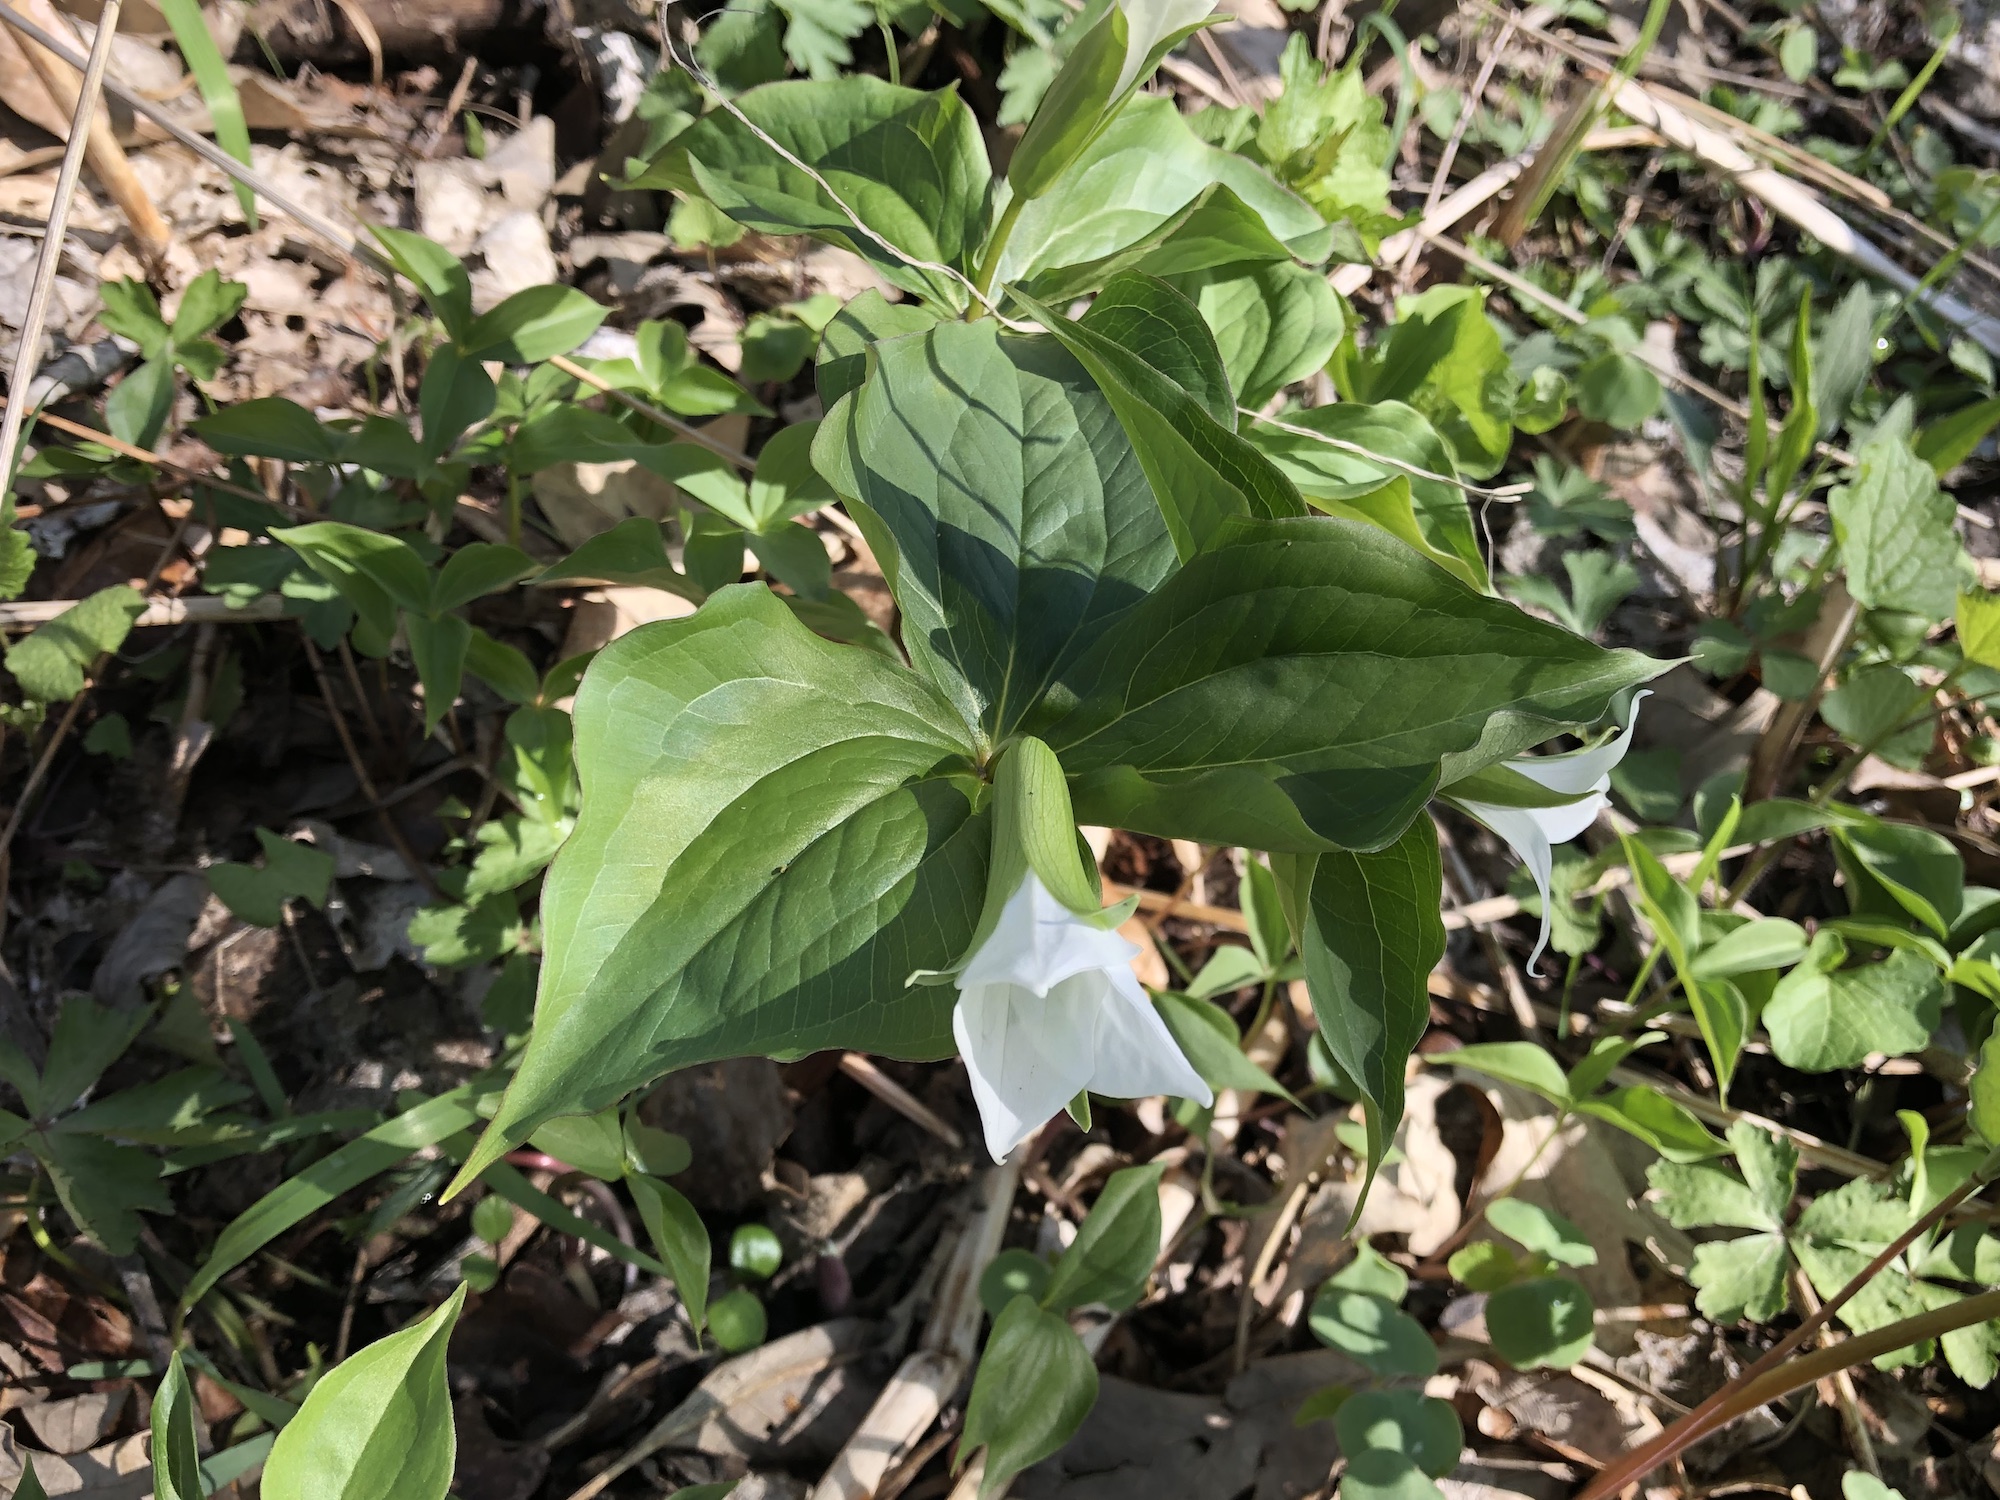 Great White Trillium on hill near Council Ring on April26, 2019.